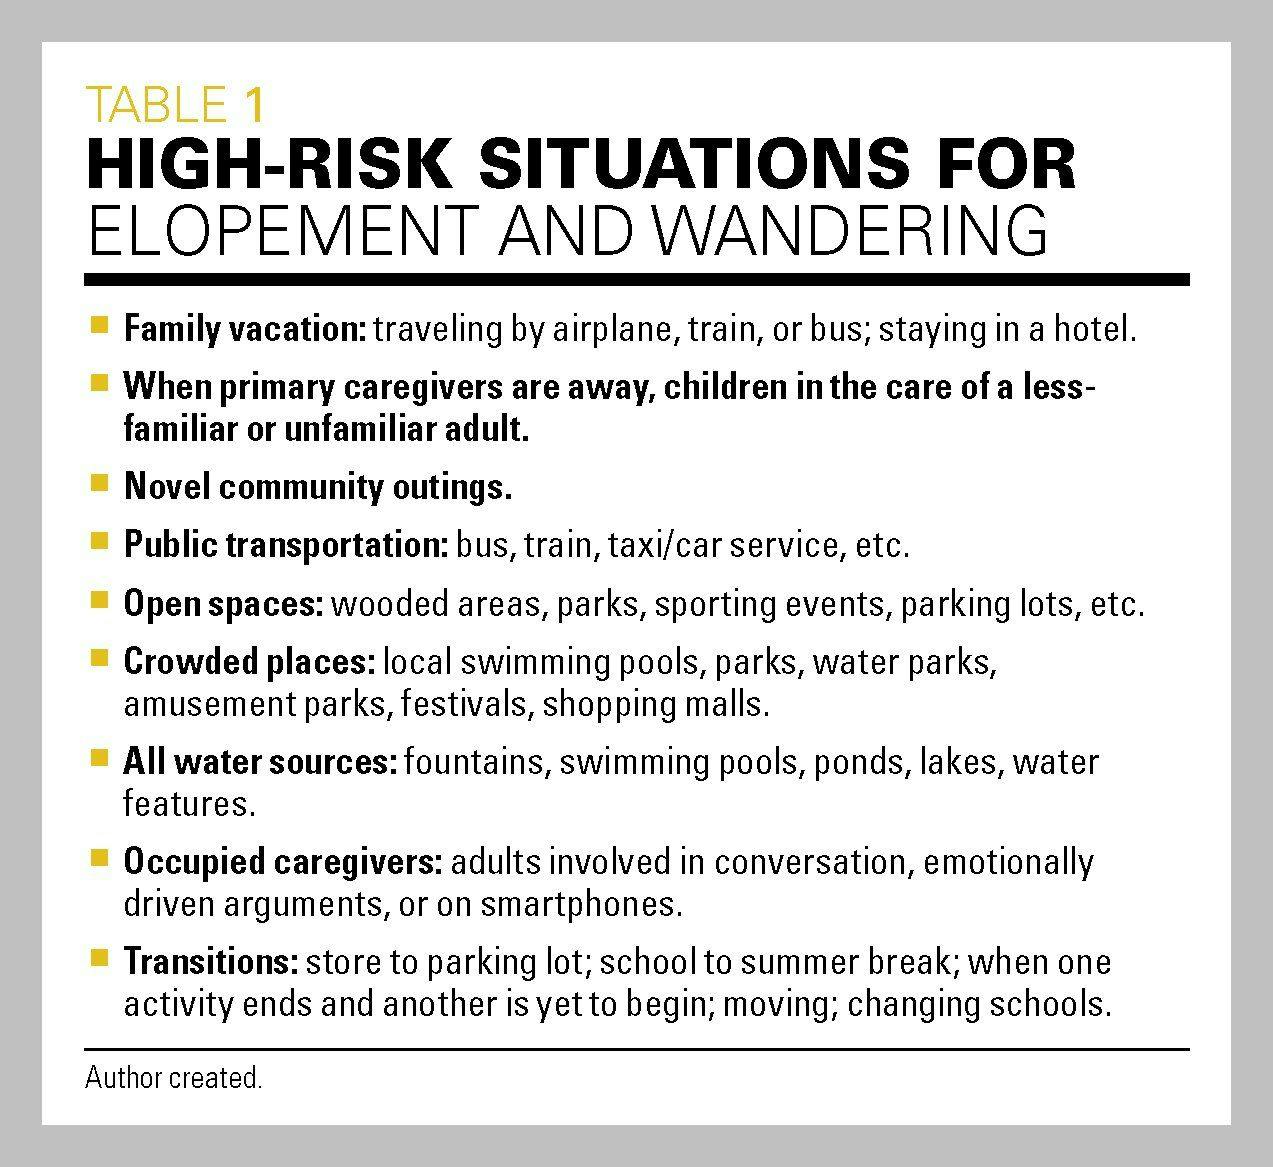 table looking at High-risk situations for elopement and wandering